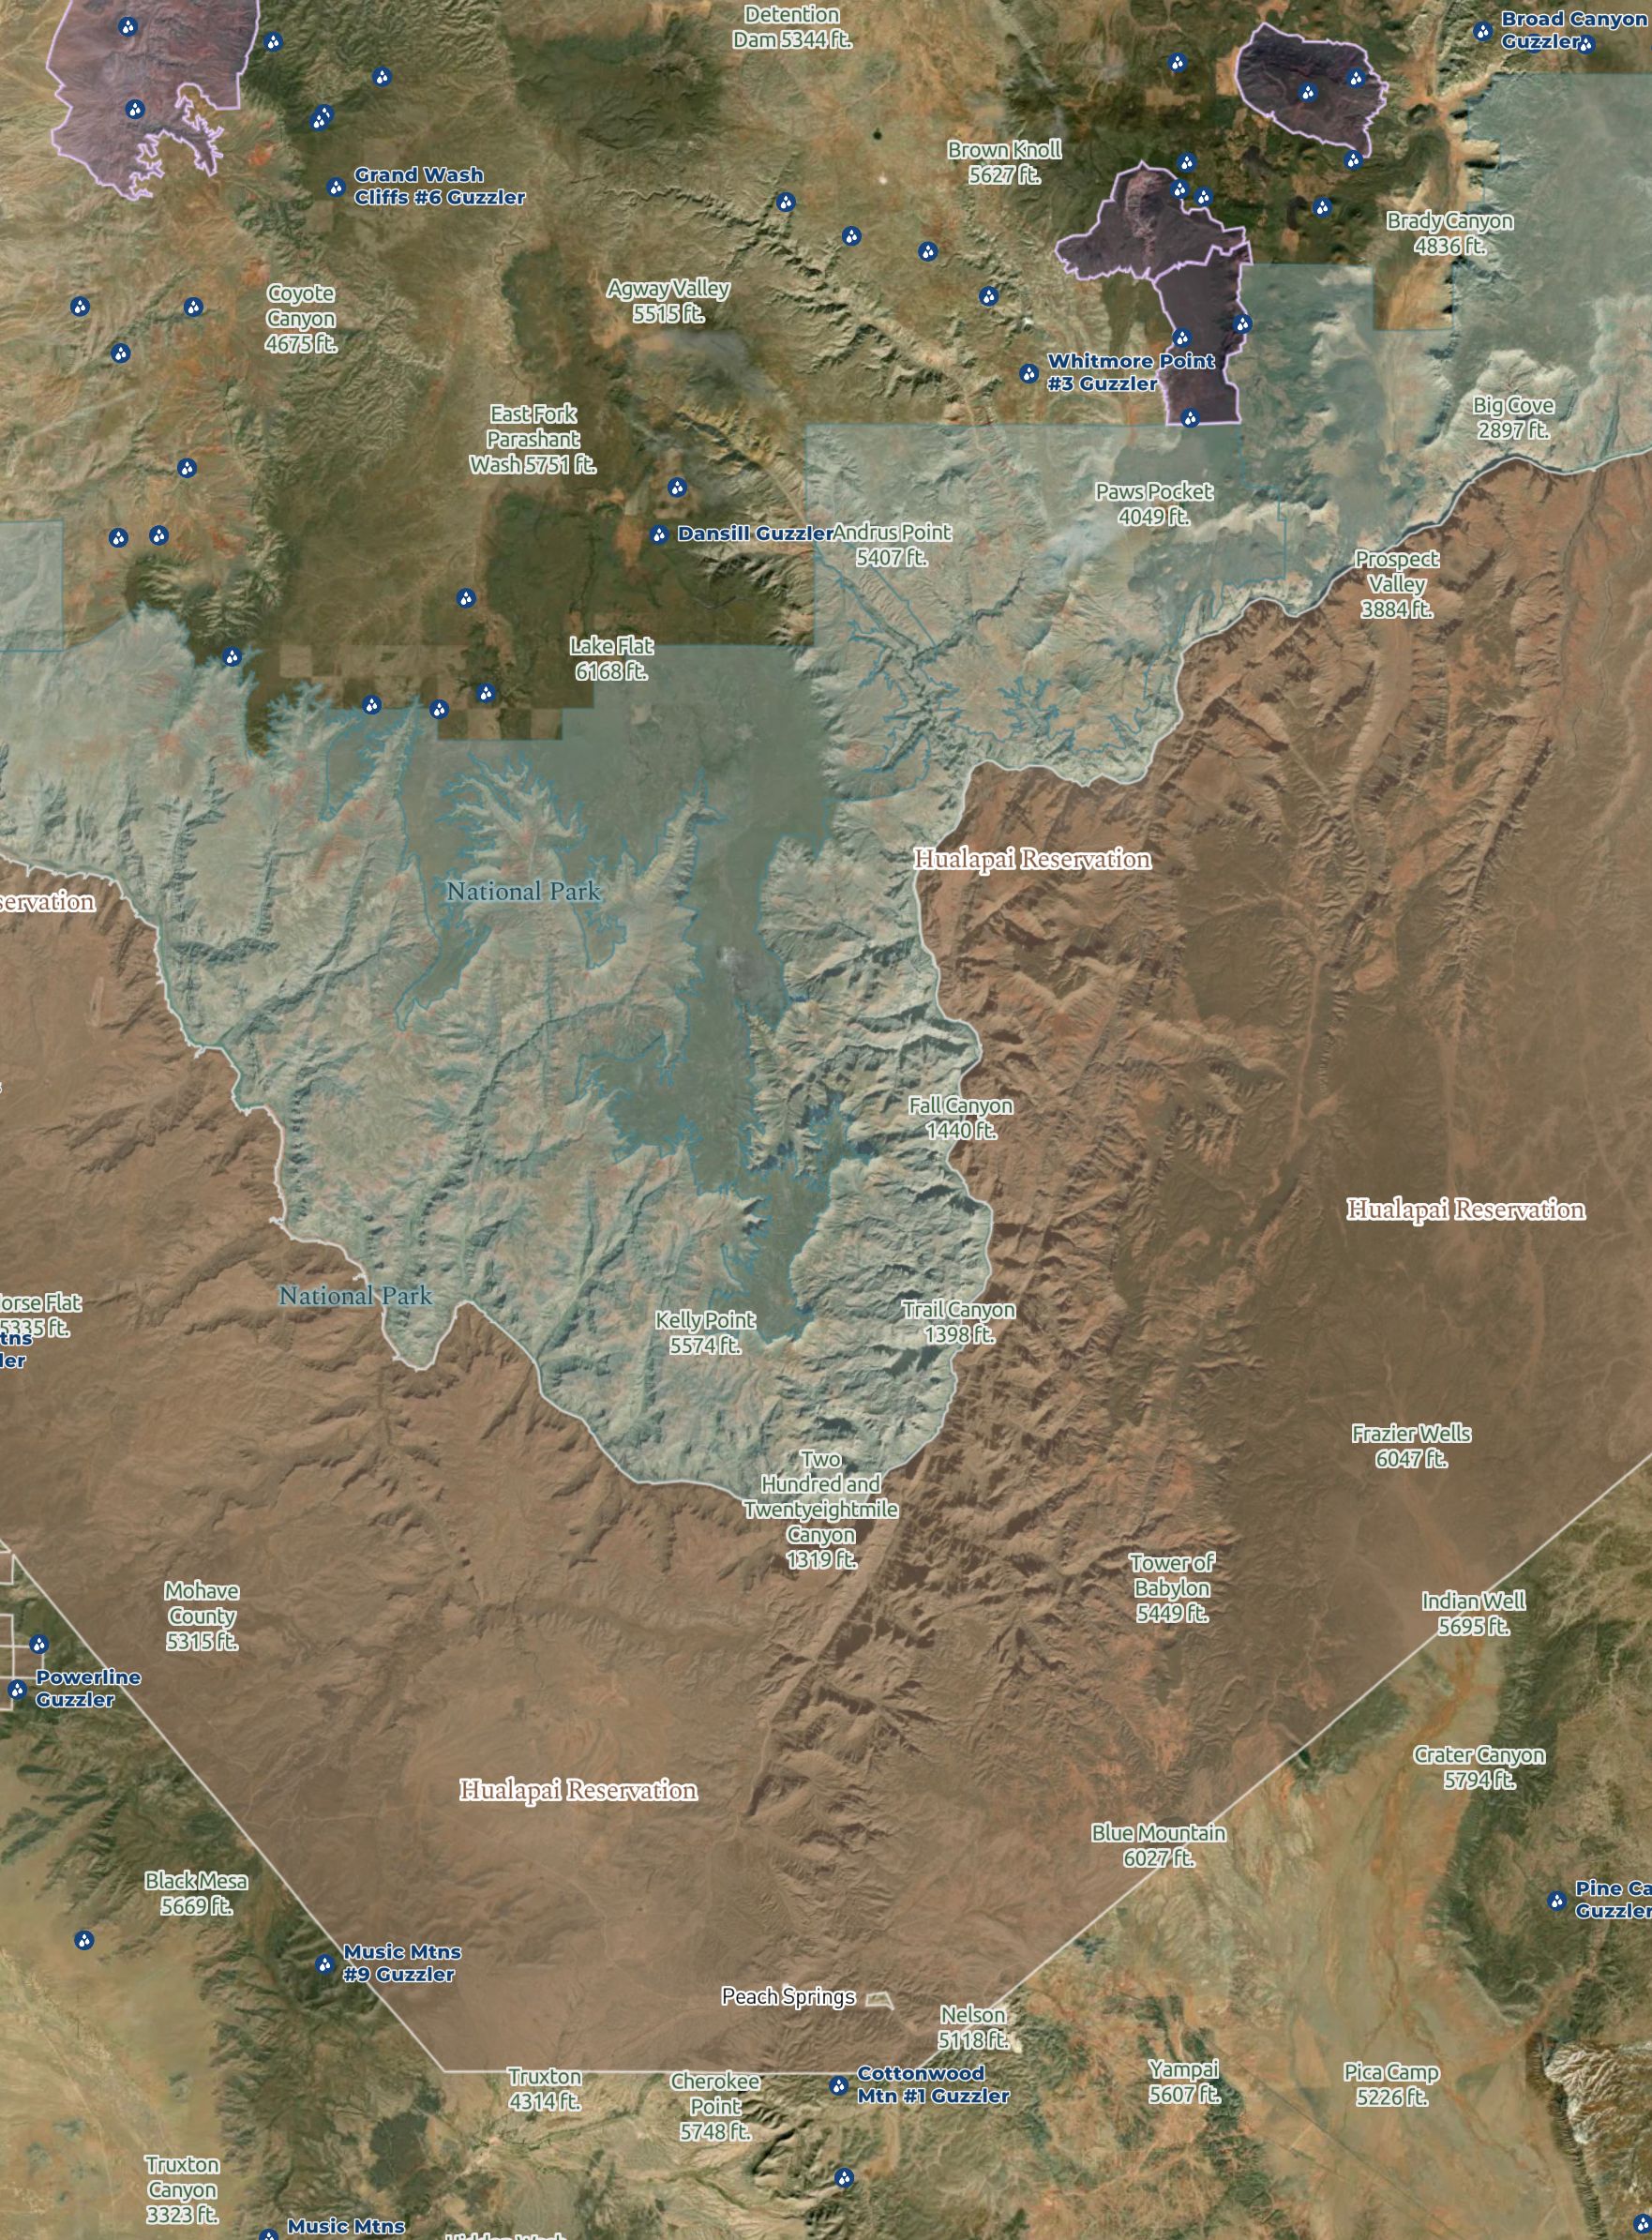 Satellite Map the Grand Canyon region with Tribal, National Parks and Wilderness Areas layers - Scout To Hunt App